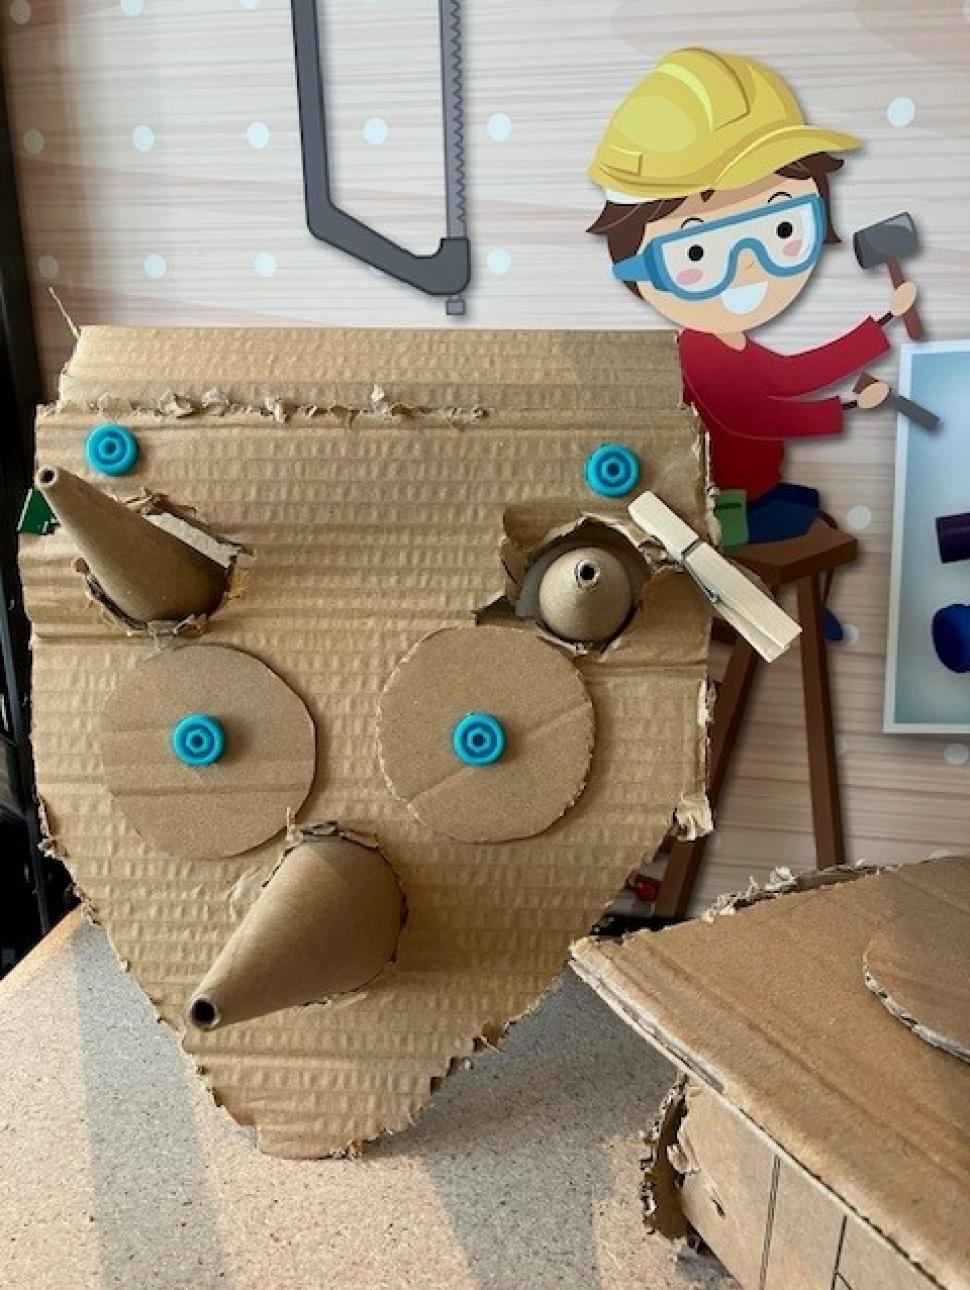 A piece of brown cardboard is fashioned into a haphazardly constructed triceratopcs head with three conical horns and two large round eyes. Small blue screws hold the piece together and a cartoon of a young boy in a yellow builders hat hangs in the background